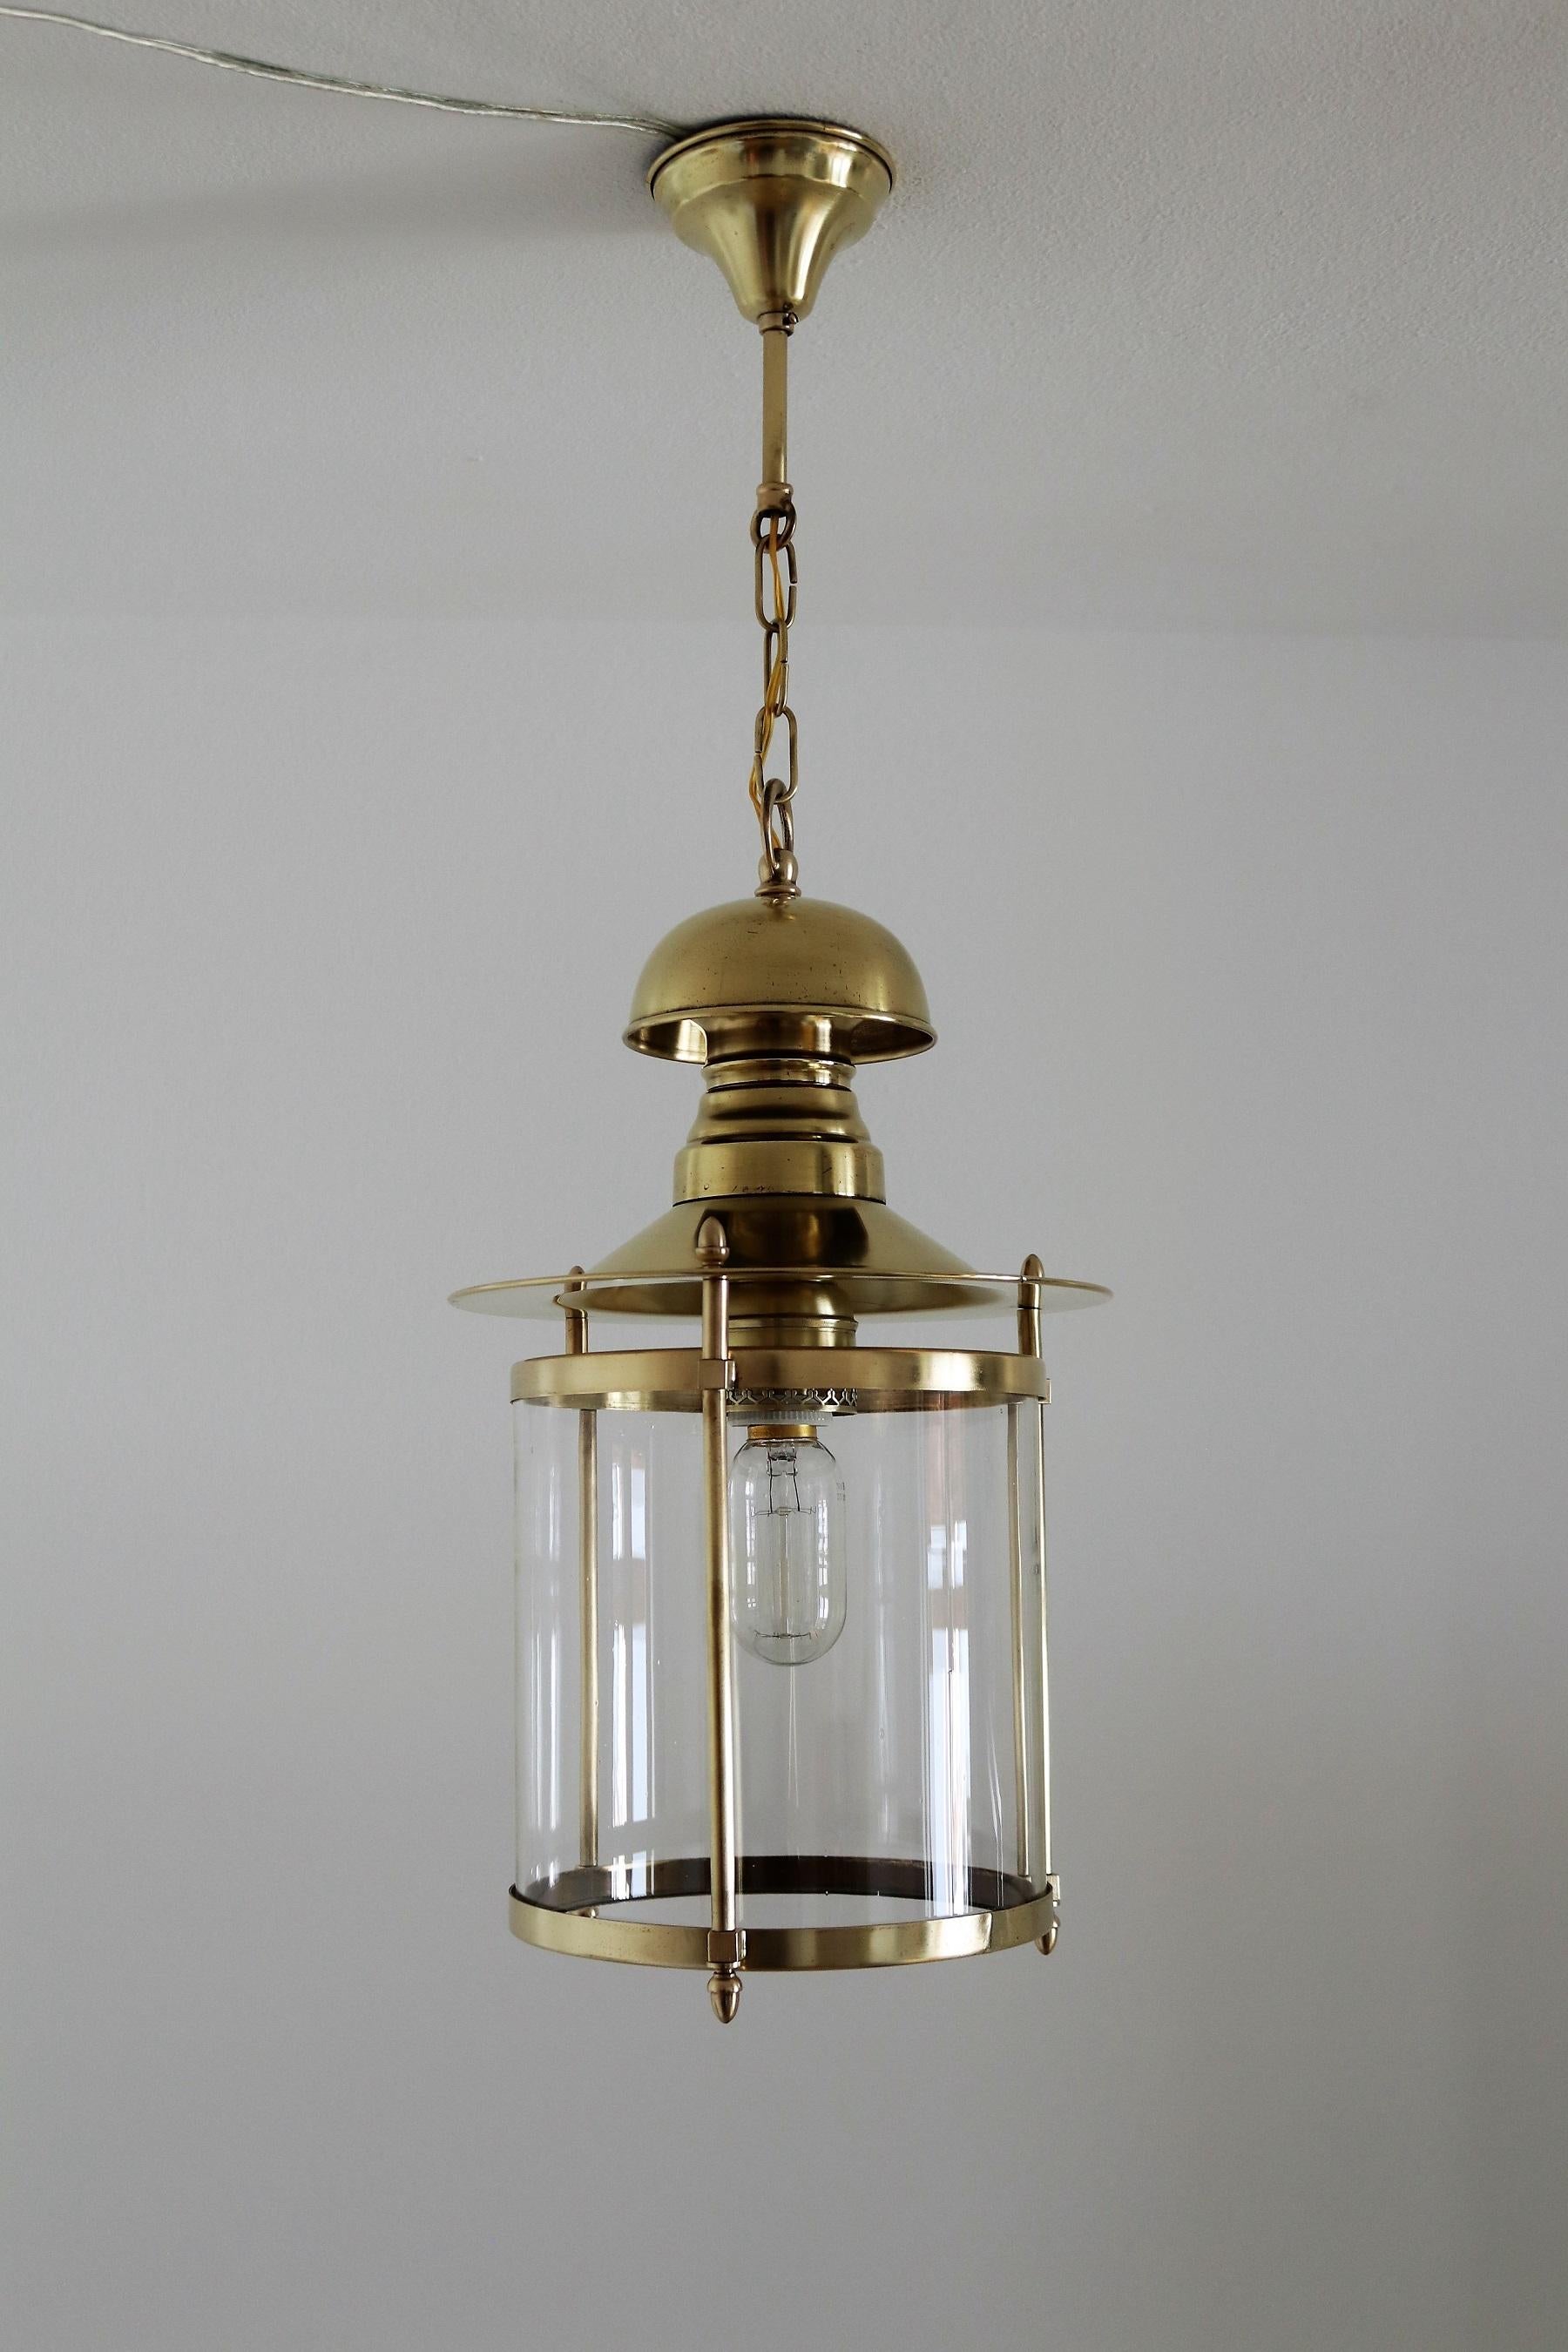 Italian Midcentury Brass and Glass Pendant Lamp or Lantern, 1970s For Sale 7